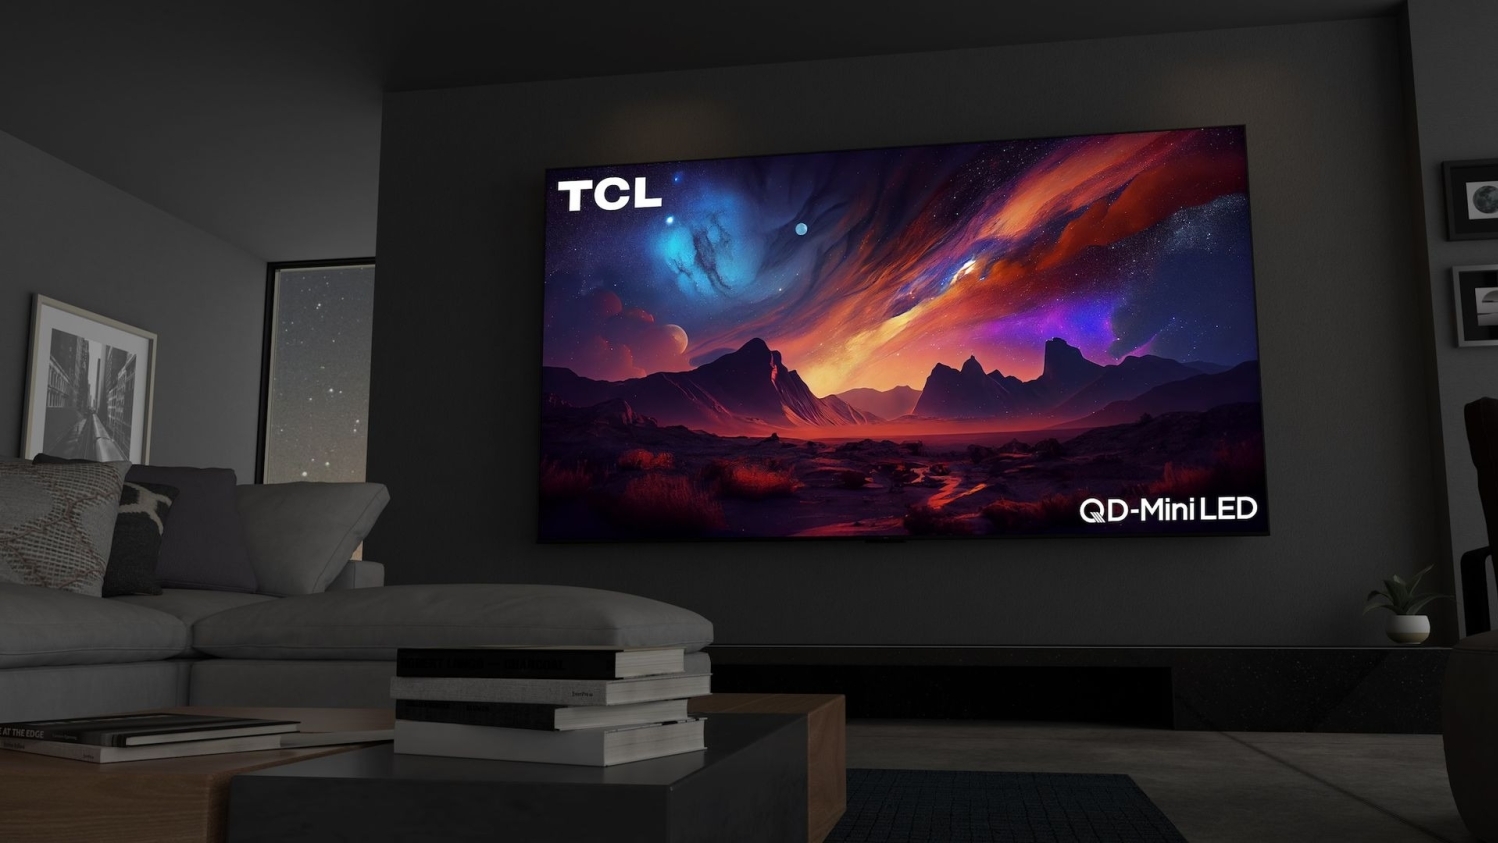 TCL shows off new 31-inch 4K 120Hz dome-shaped OLED gaming monitor